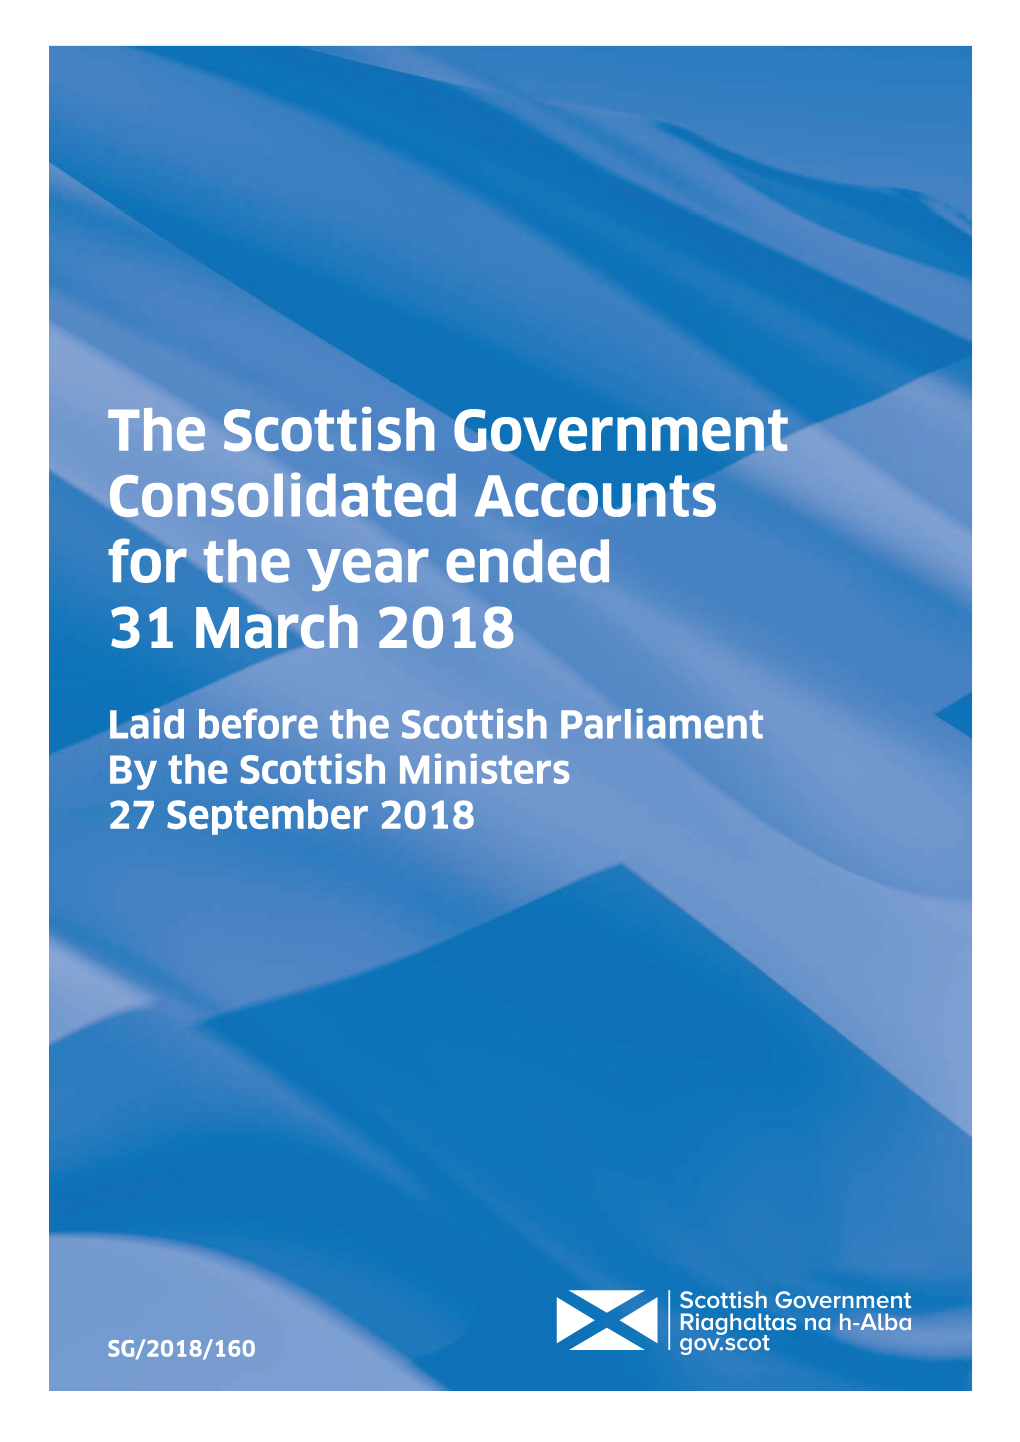 The Scottish Government Consolidated Accounts for the Year Ended 31 March 2018